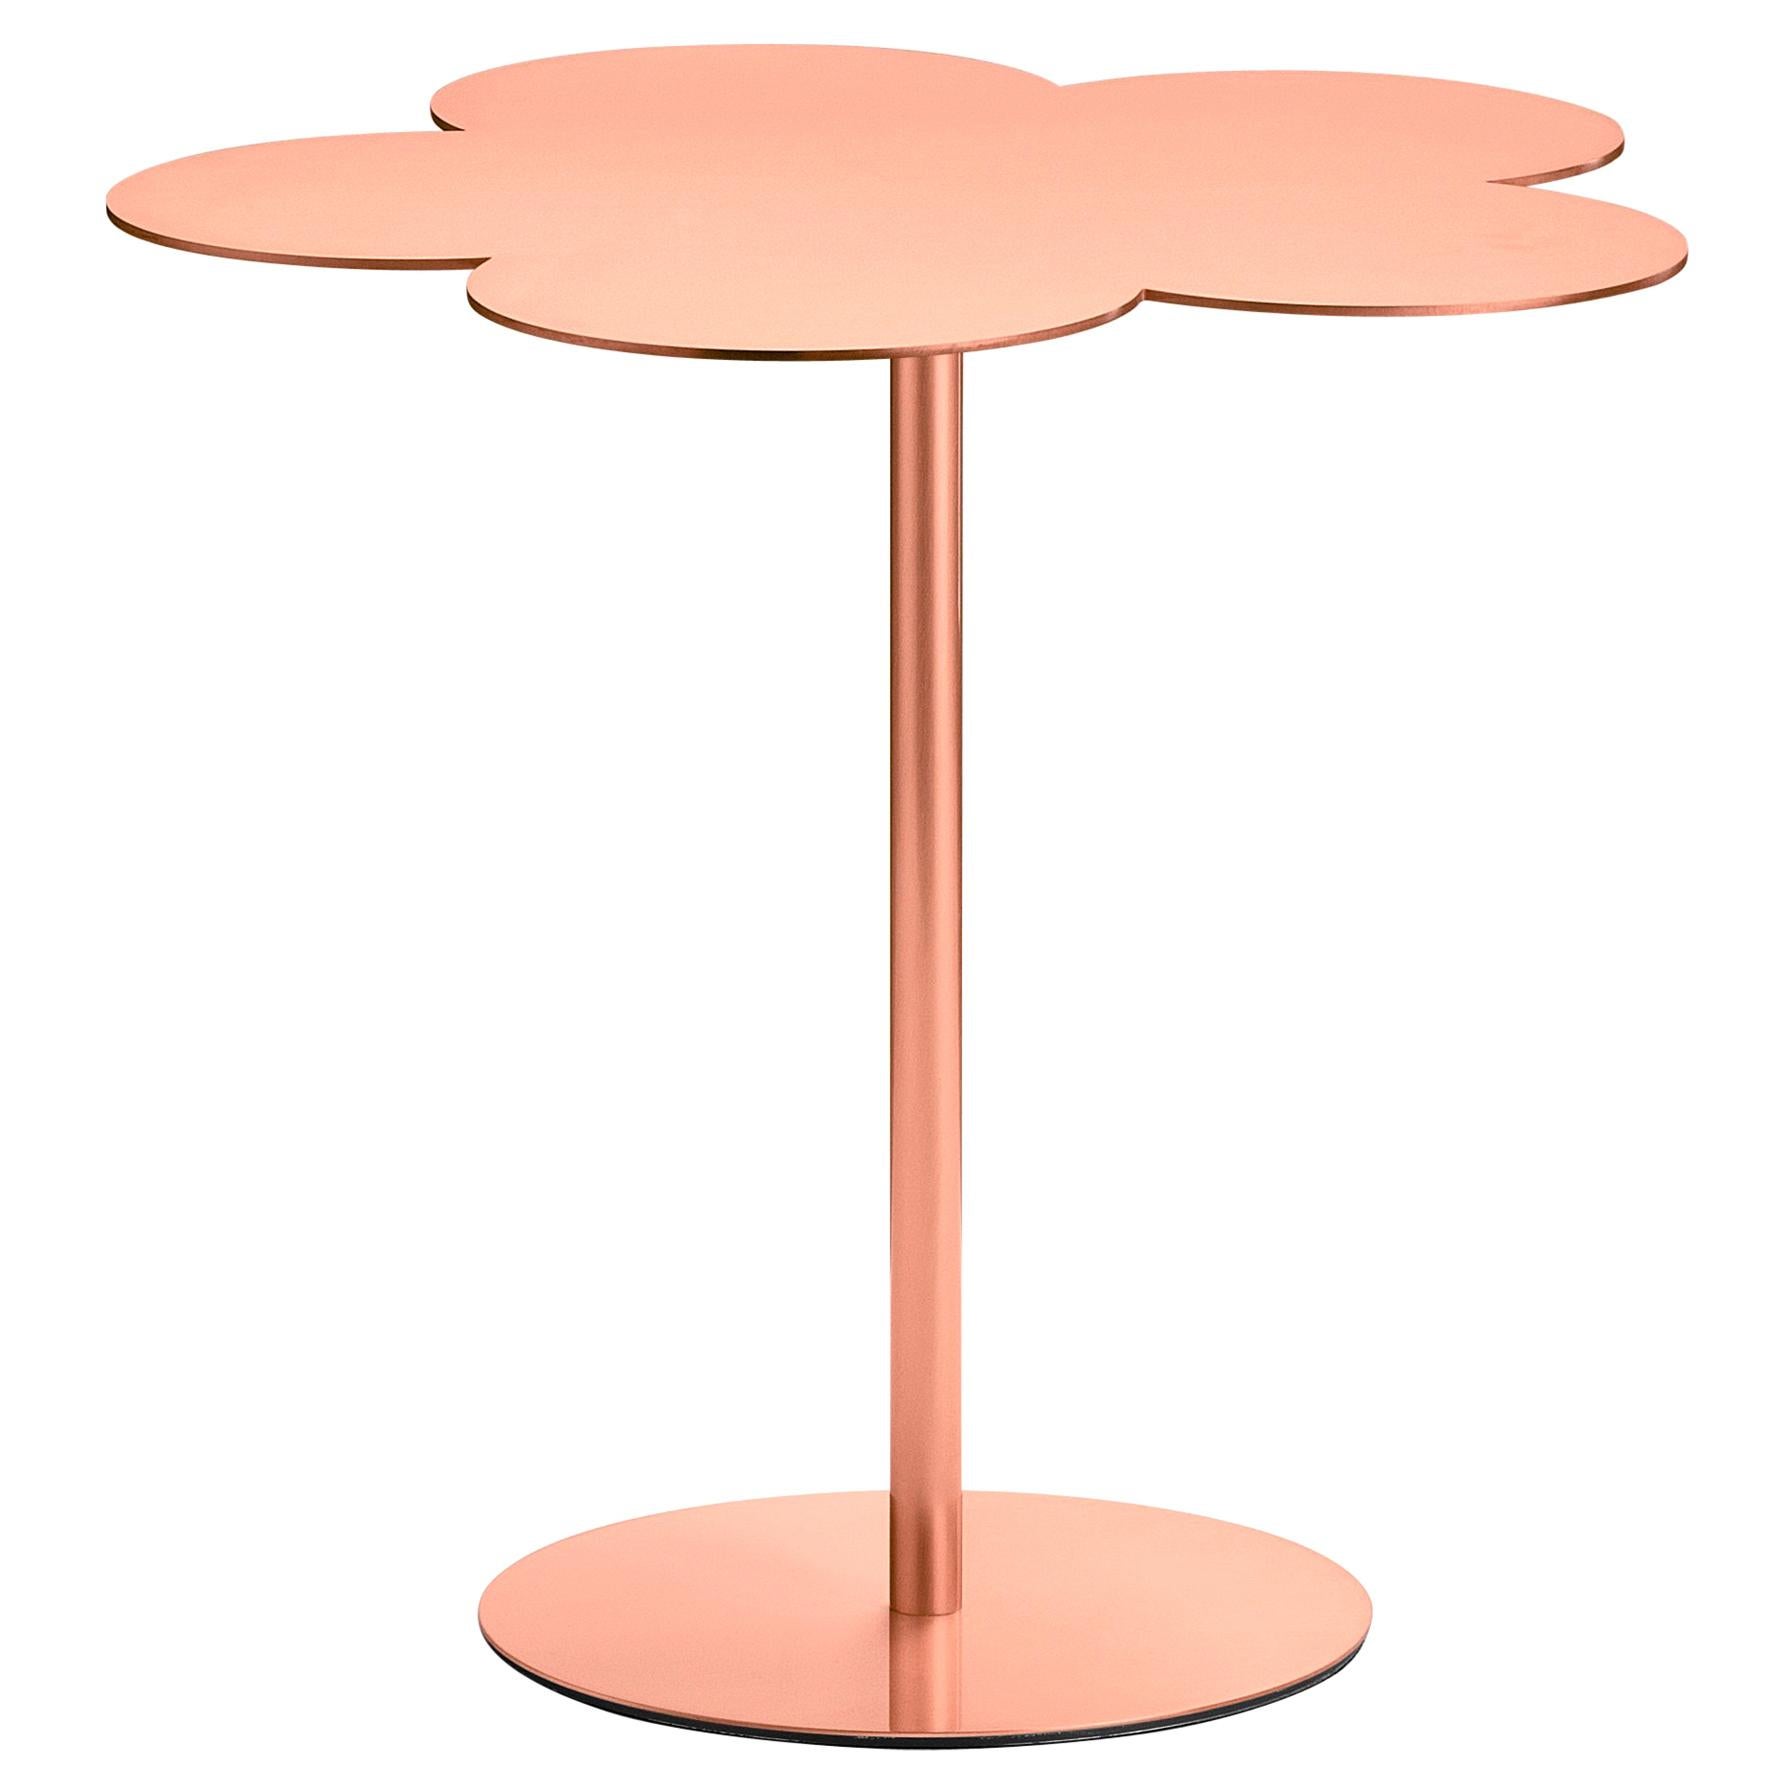 Ghidini 1961 Large Flowers Coffee Side Table in Copper by Stefano Giovannoni For Sale